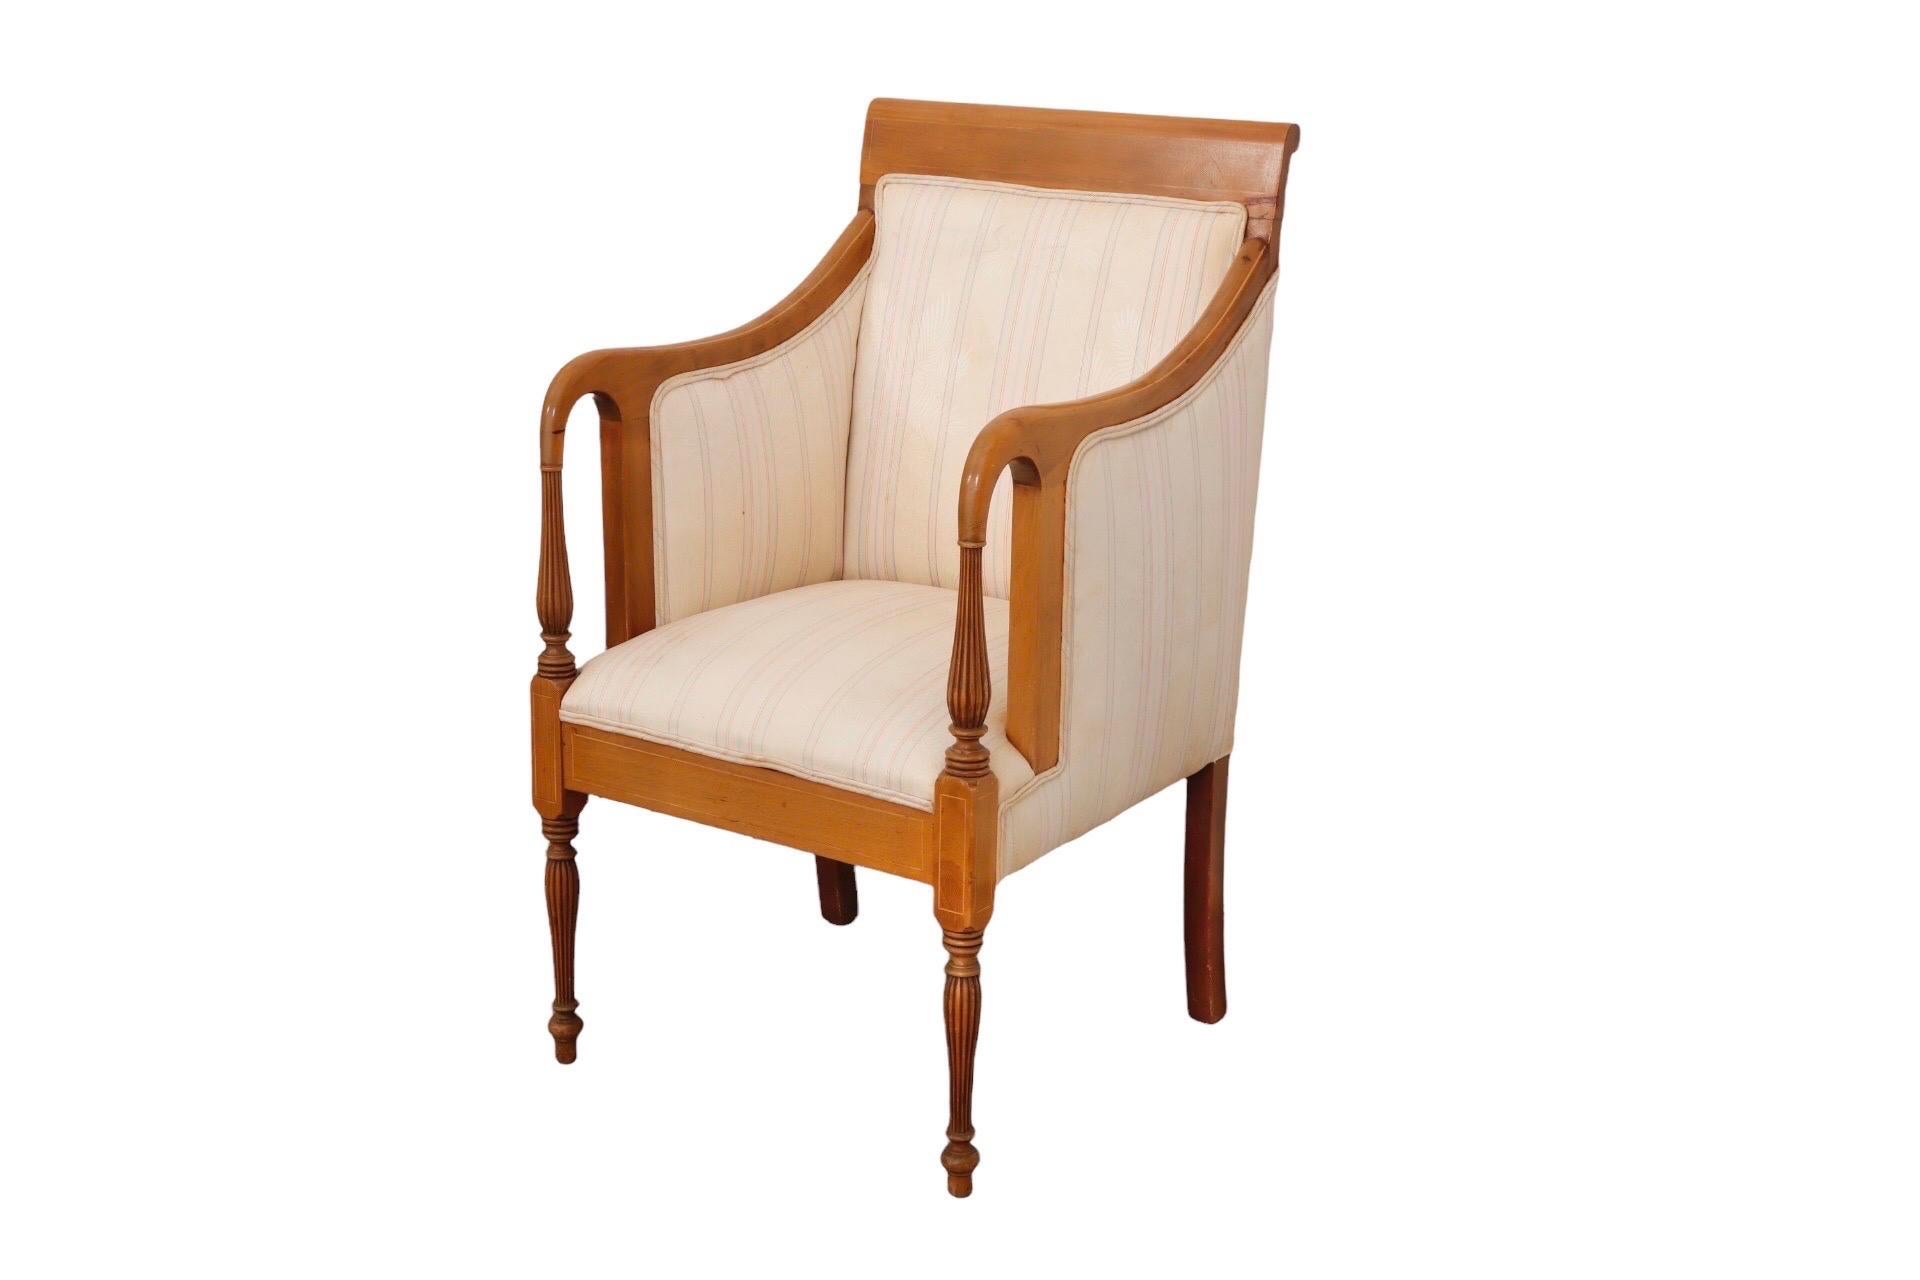 Empire style armchair made of maple. A flat crest rail and downswept reeded arms are both inlaid with blond maple. Front legs are turned and reeded finished with turnip feet. The front back, seat and back are upholstered with vintage striped beige